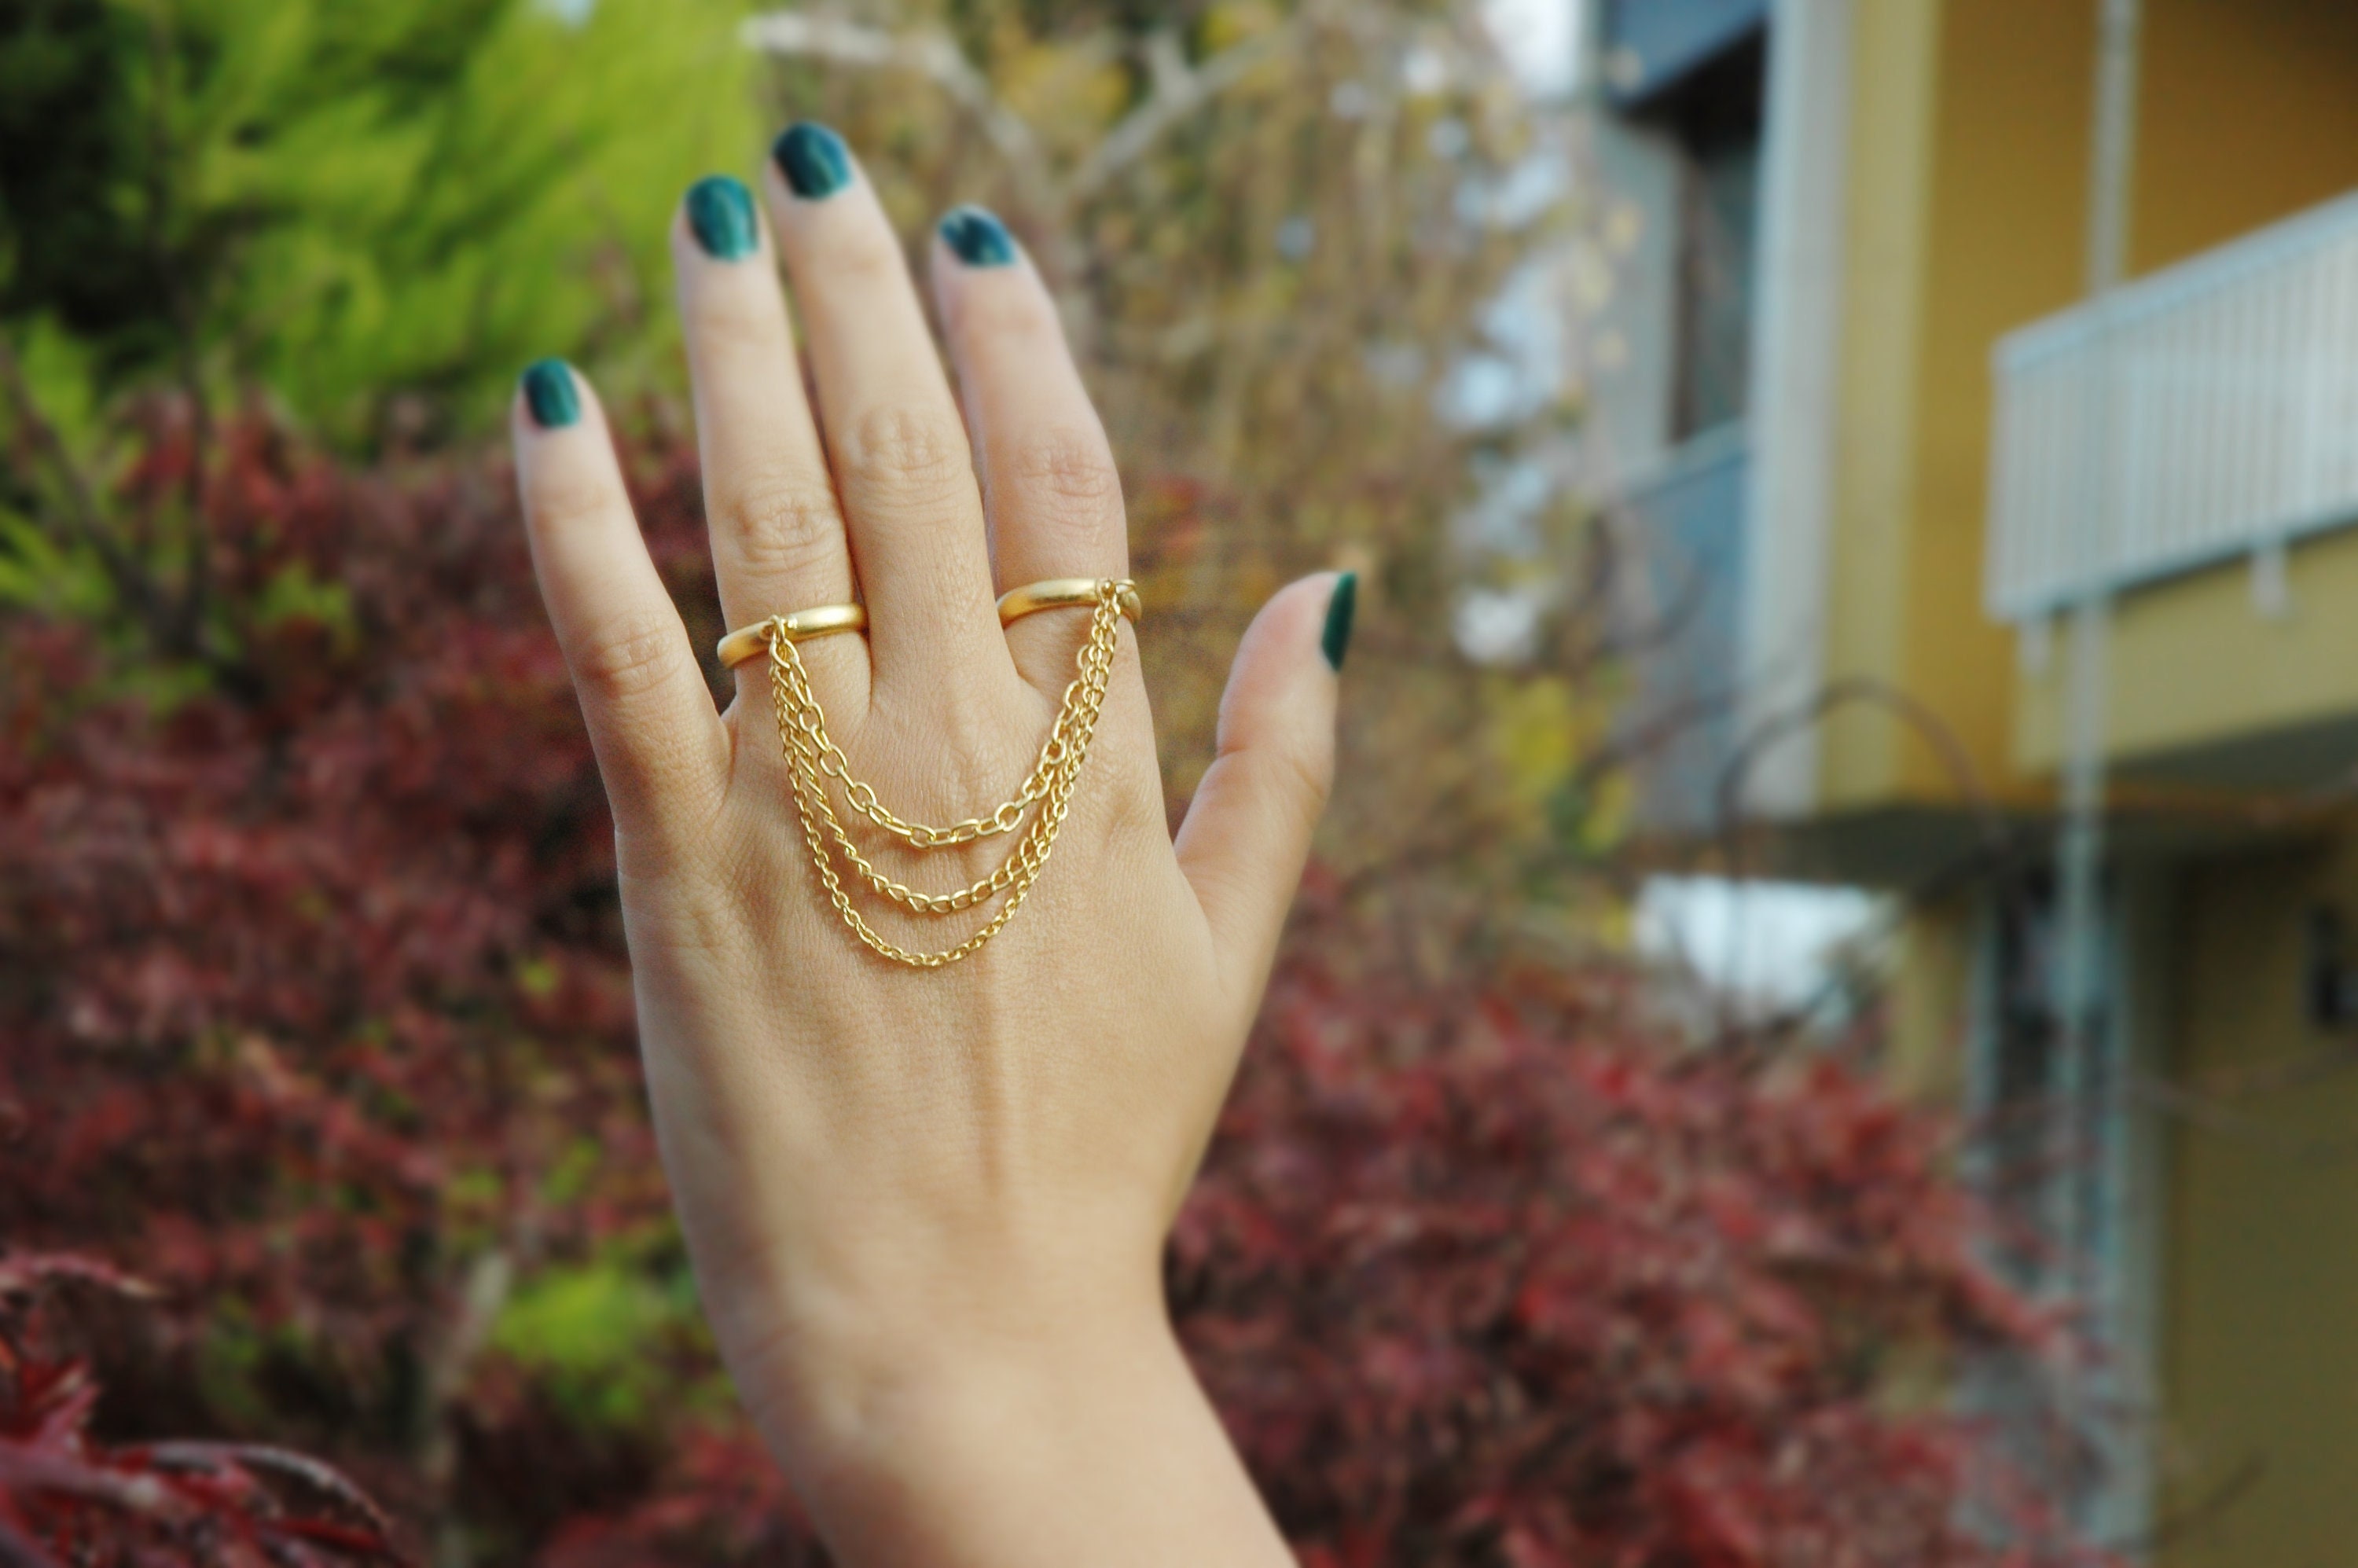 Chained Rings · How To Make A Chain Ring · Jewelry Making on Cut Out + Keep